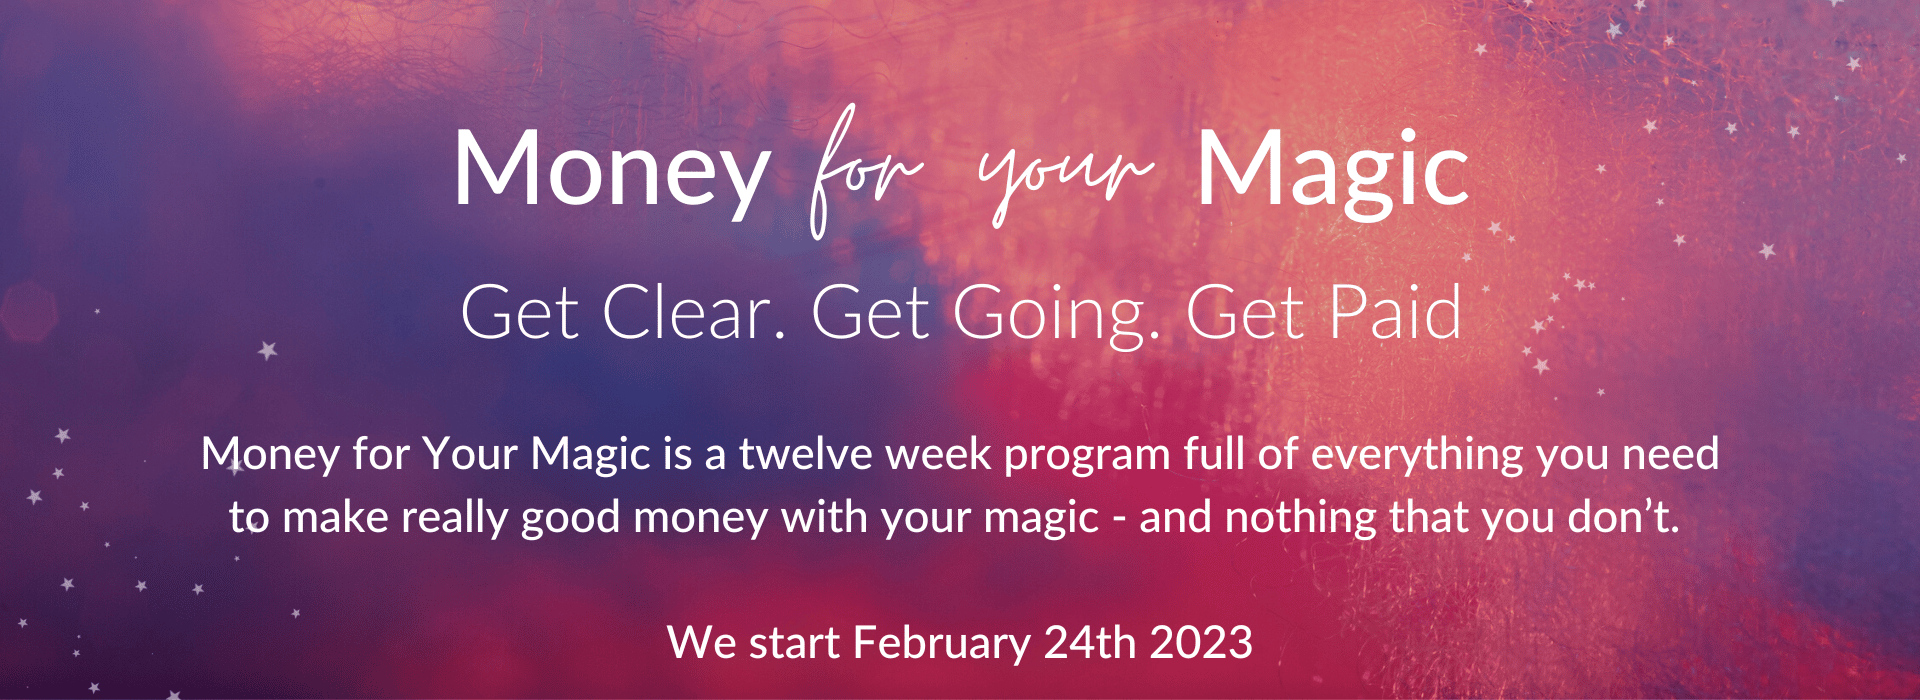 Money for your Magic